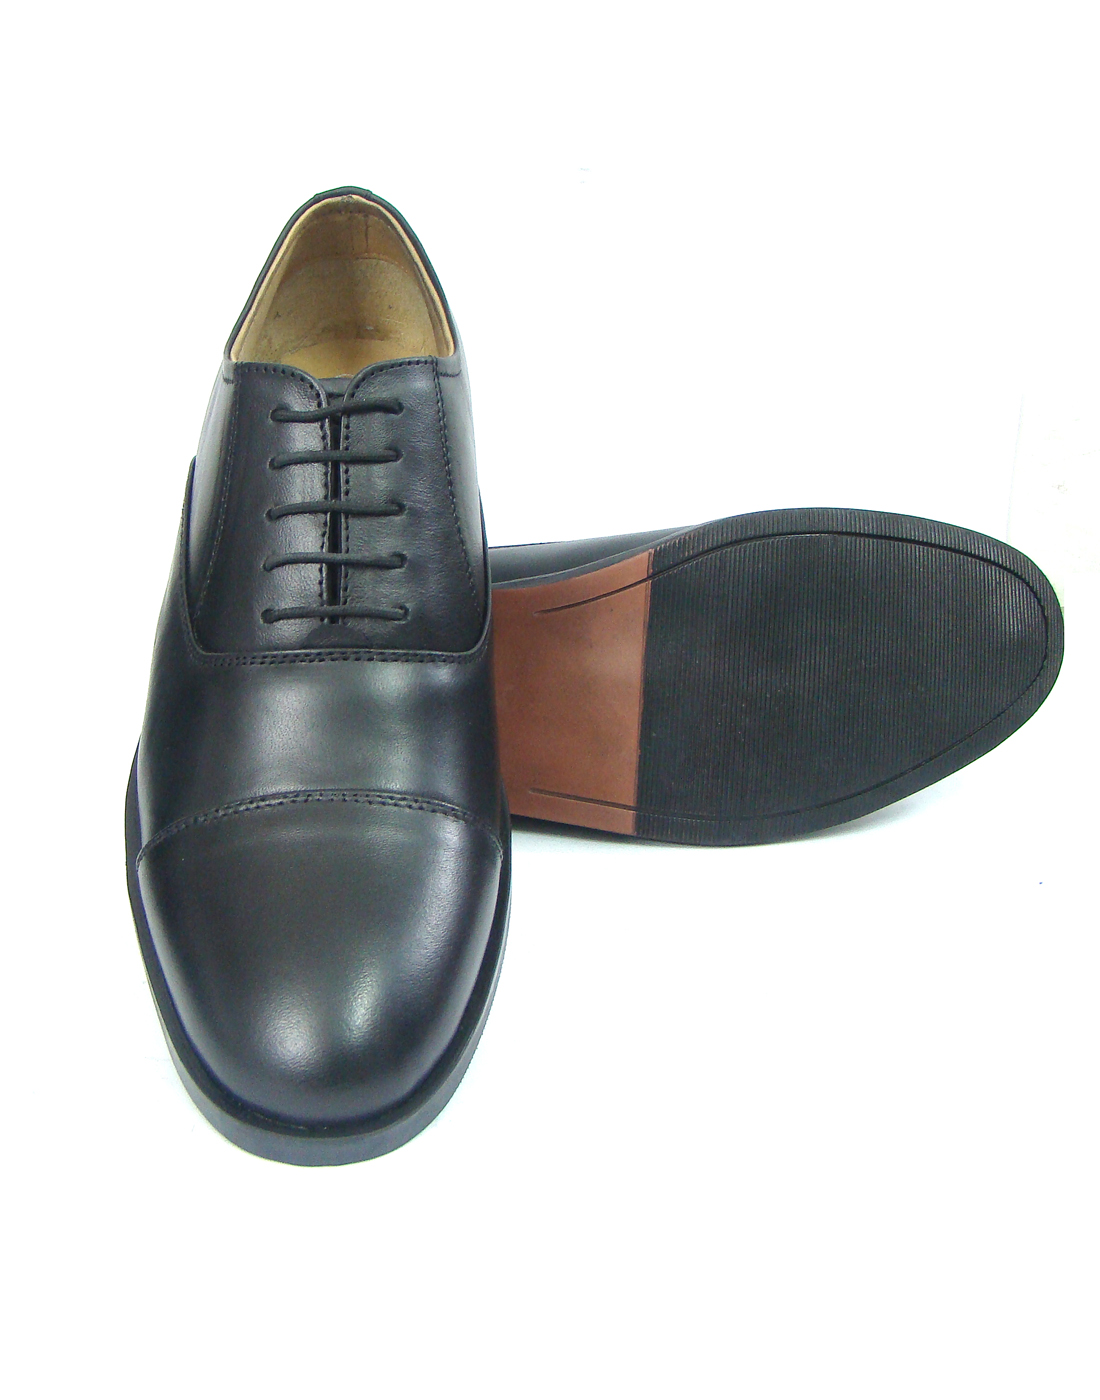 ASM Pure Leather Formal Black Oxford Shoes. Size Available 5 to 15 UK/India  – Article : 110 | Agra Shoe Mart